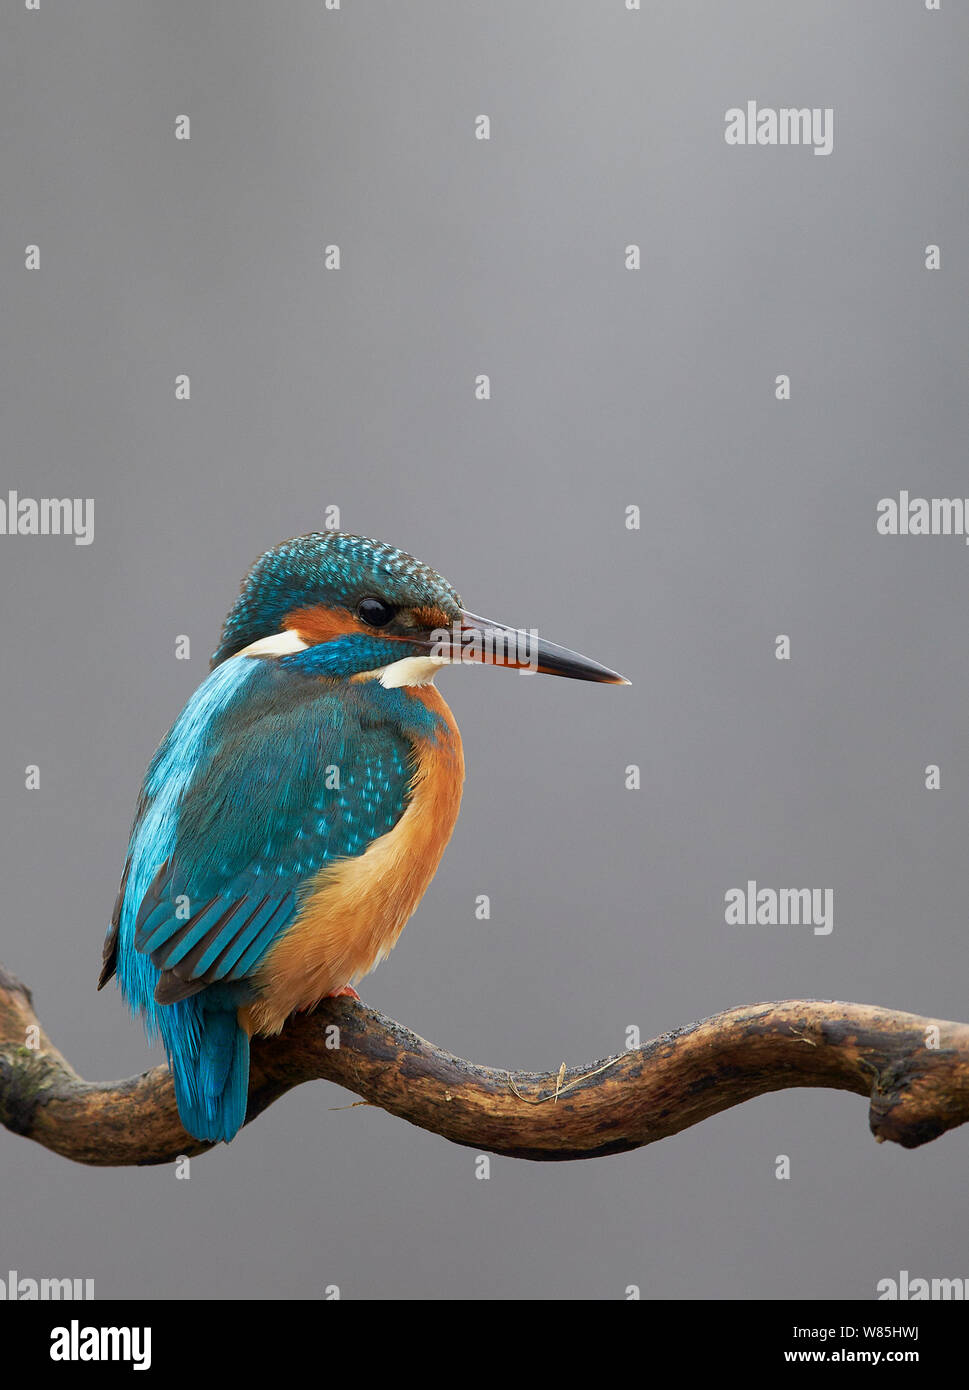 Kingfisher (Alcedo atthis) perched on branch, Hungary, January. Stock Photo